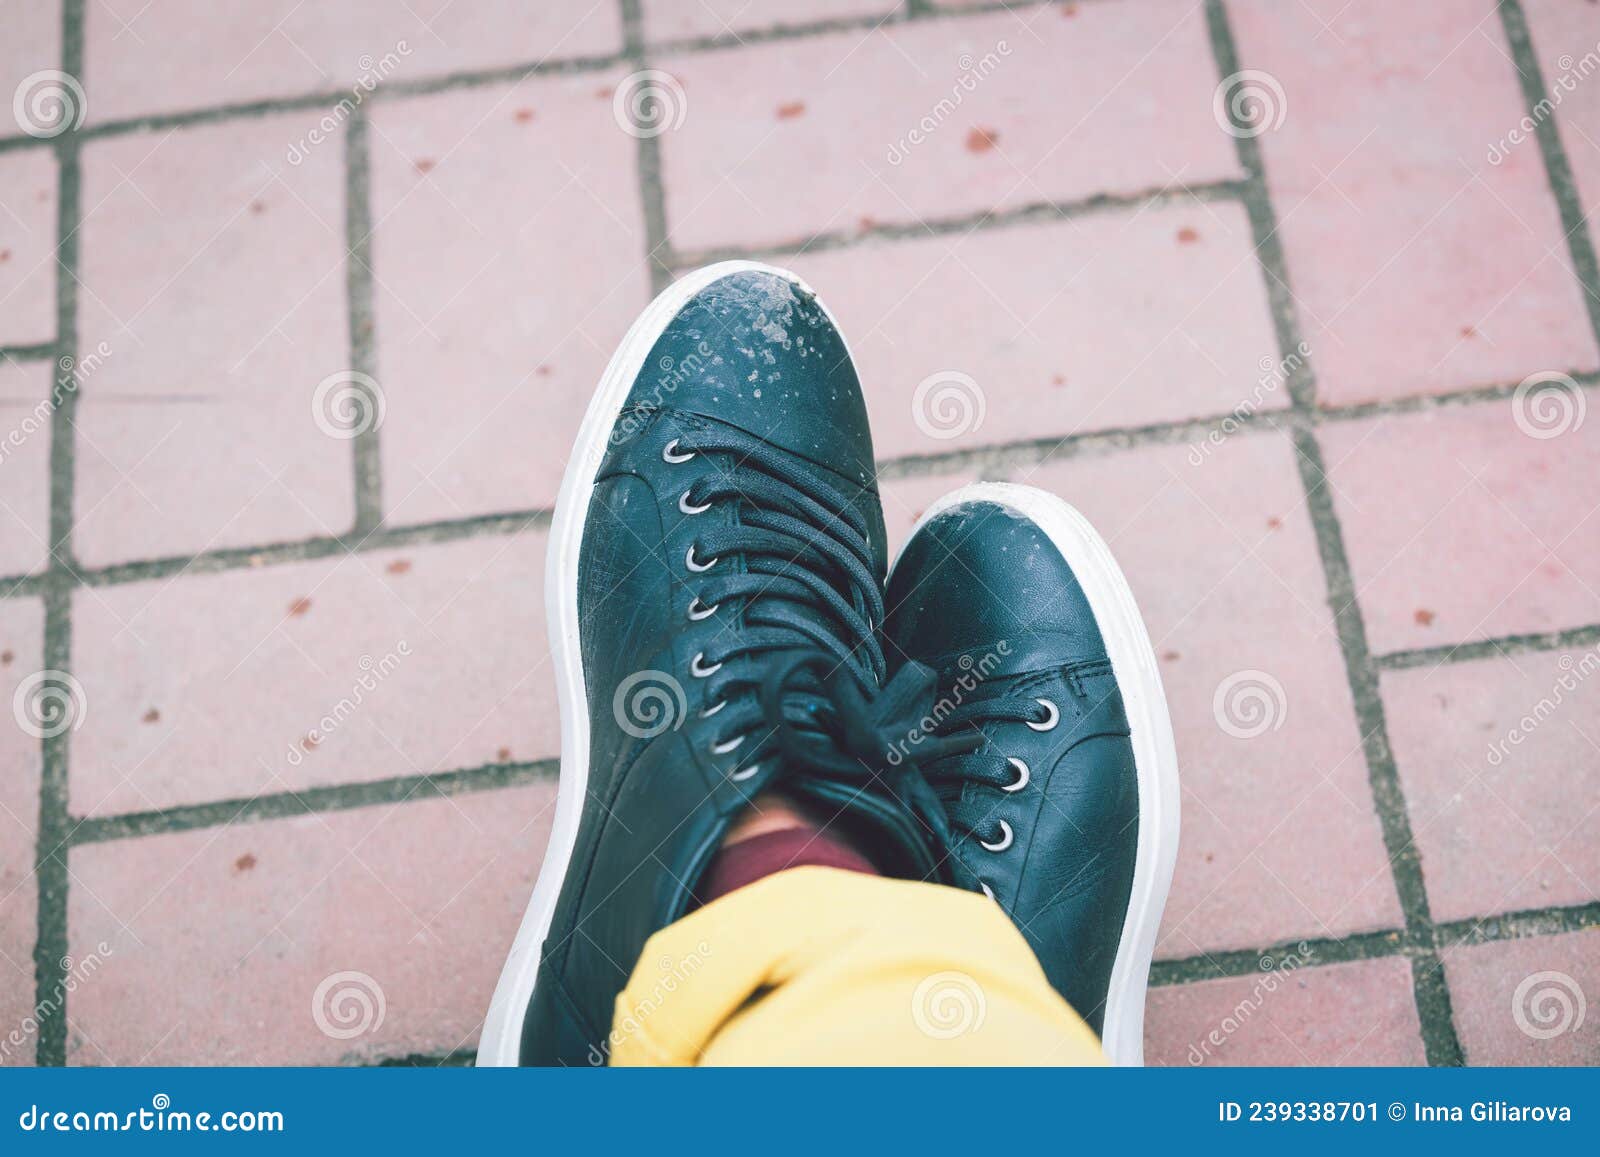 Leather Black Sneakers with White Soles Stock Image - Image of selfie ...